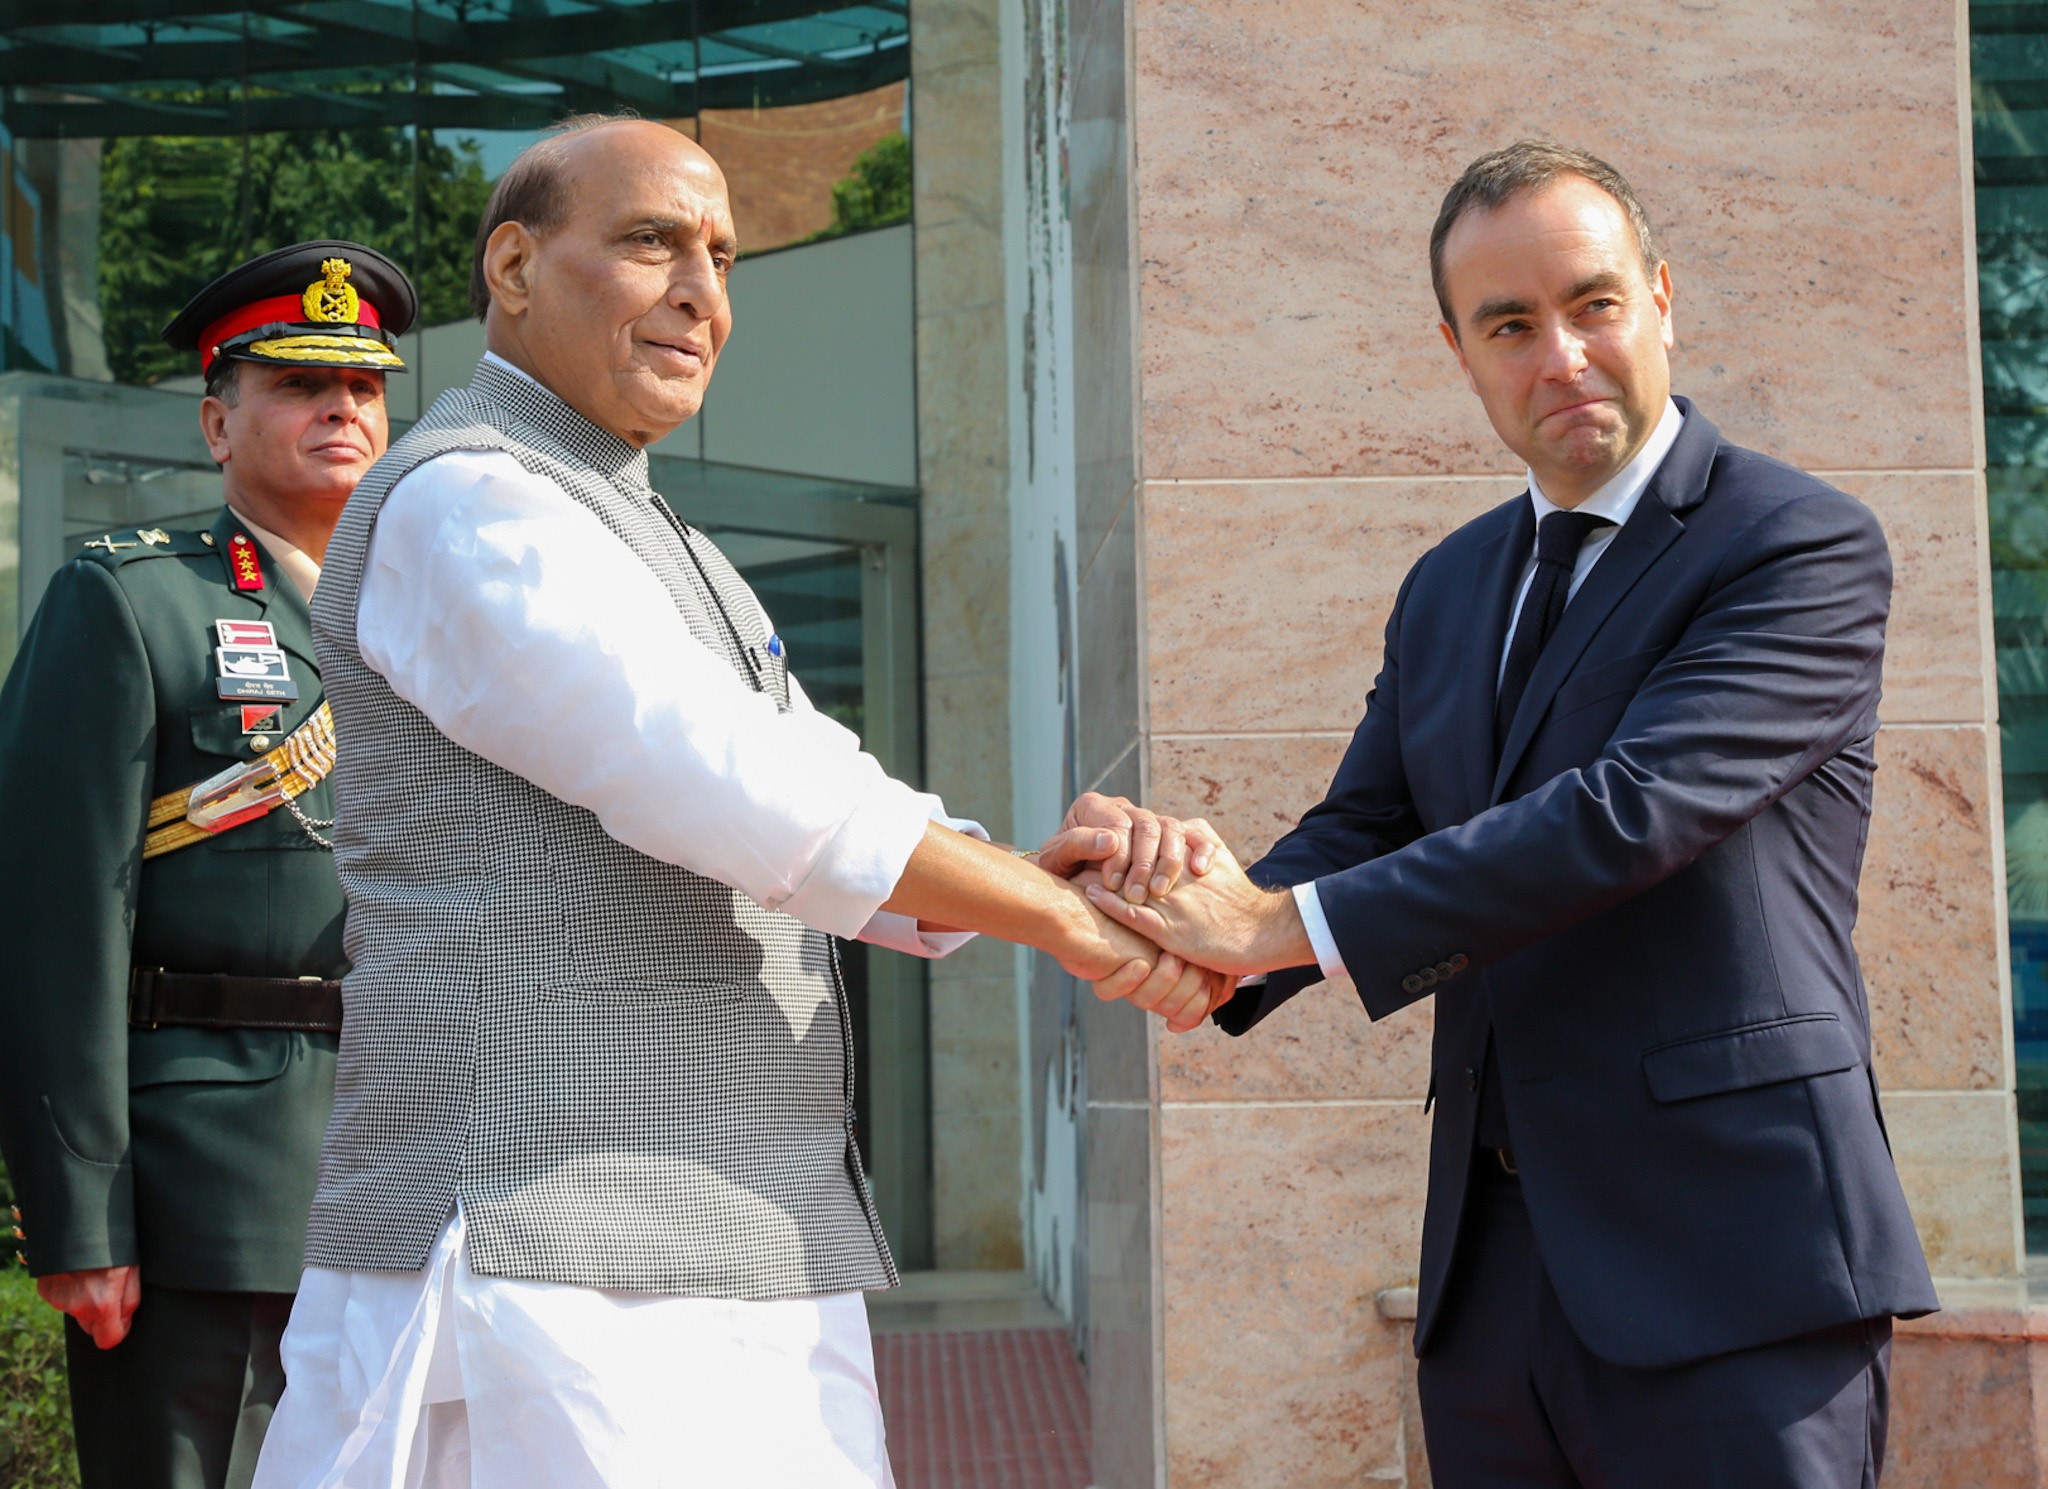 The Union Minister for Defence, Shri Rajnath Singh receiving the Minister of Armed Forces of the French Republic, Mr. Sebastien Lecornu ahead of the India-France Annual Defence Dialogue, in New Delhi on November 28, 2022.